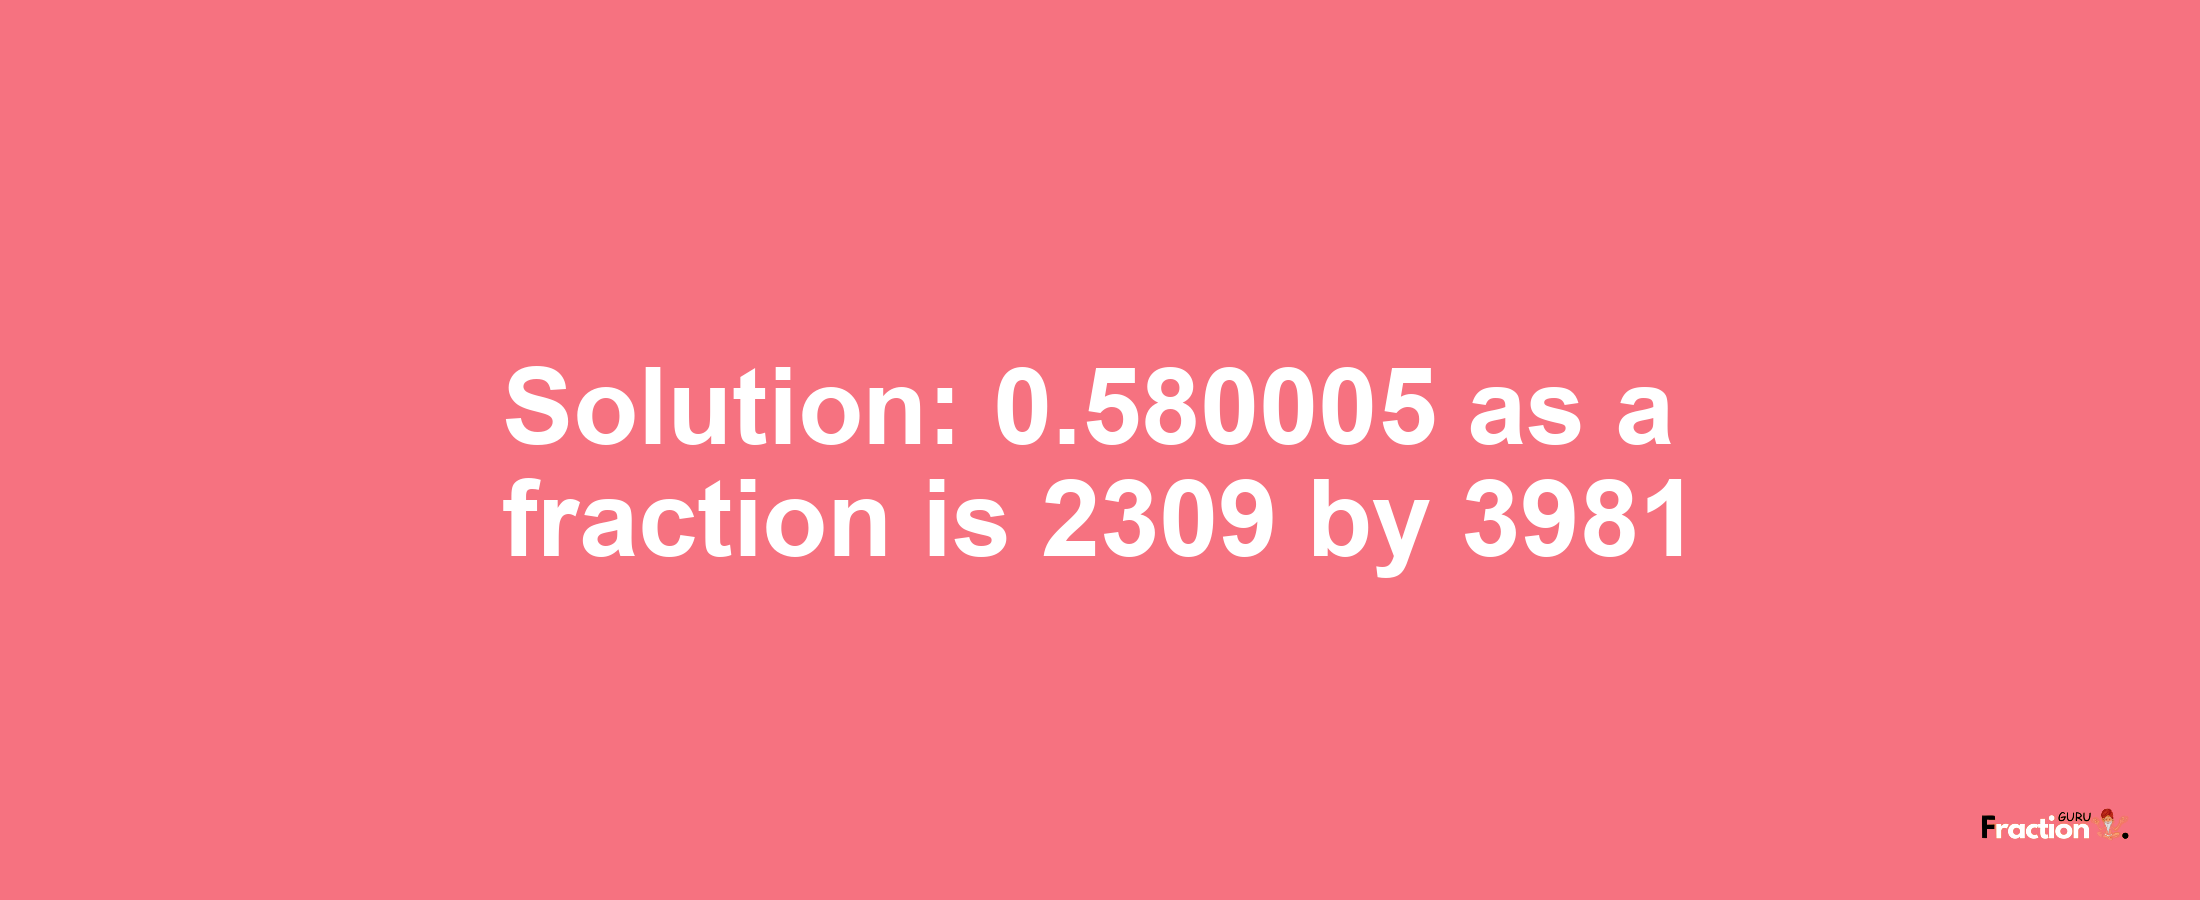 Solution:0.580005 as a fraction is 2309/3981